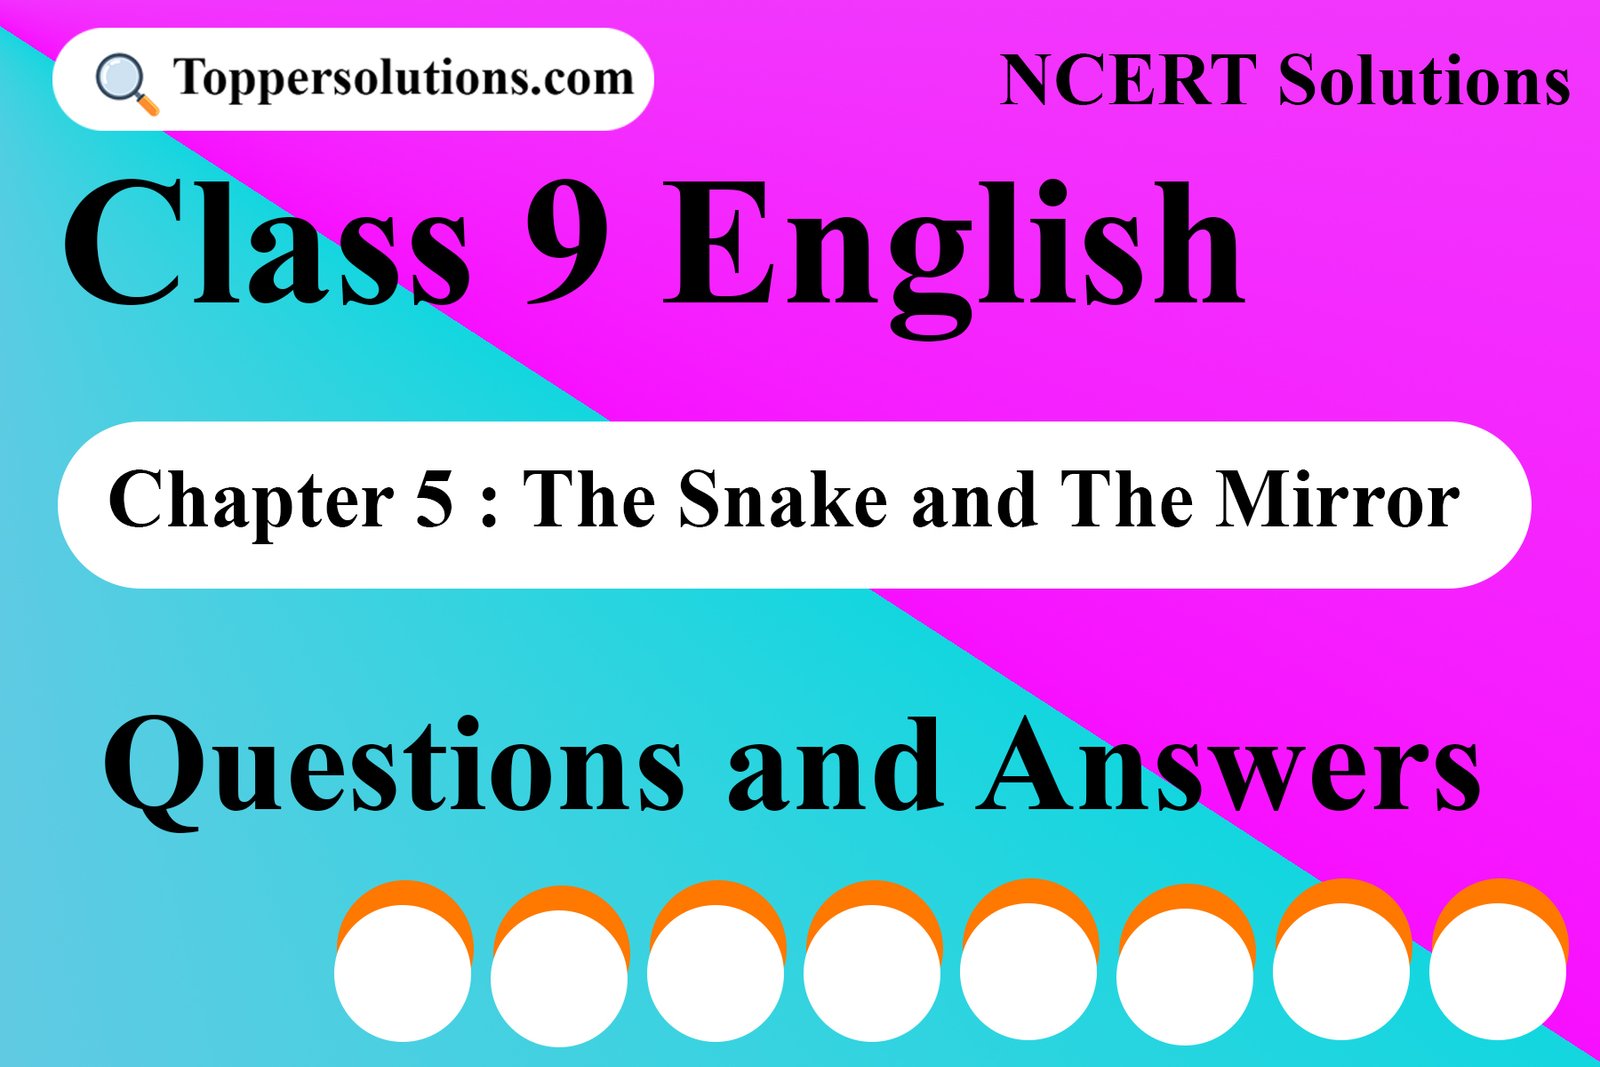 Chapter 5 : The Snake and The Mirror Questions and Answers